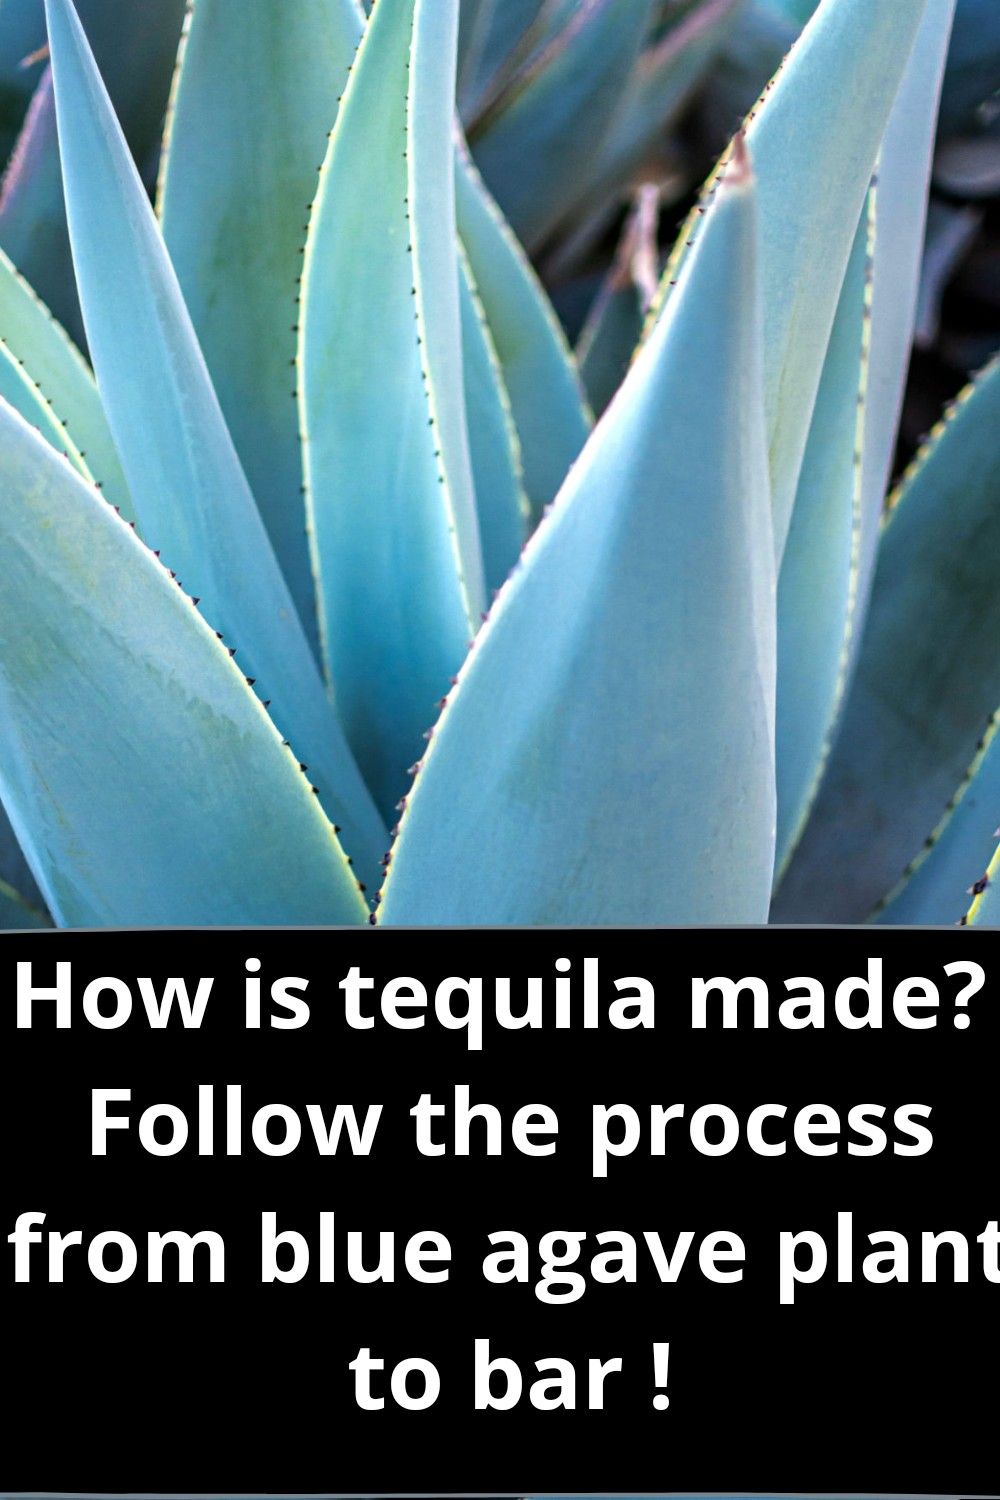 How is tequila made,which plant tequila,where tequila plant find,how ...